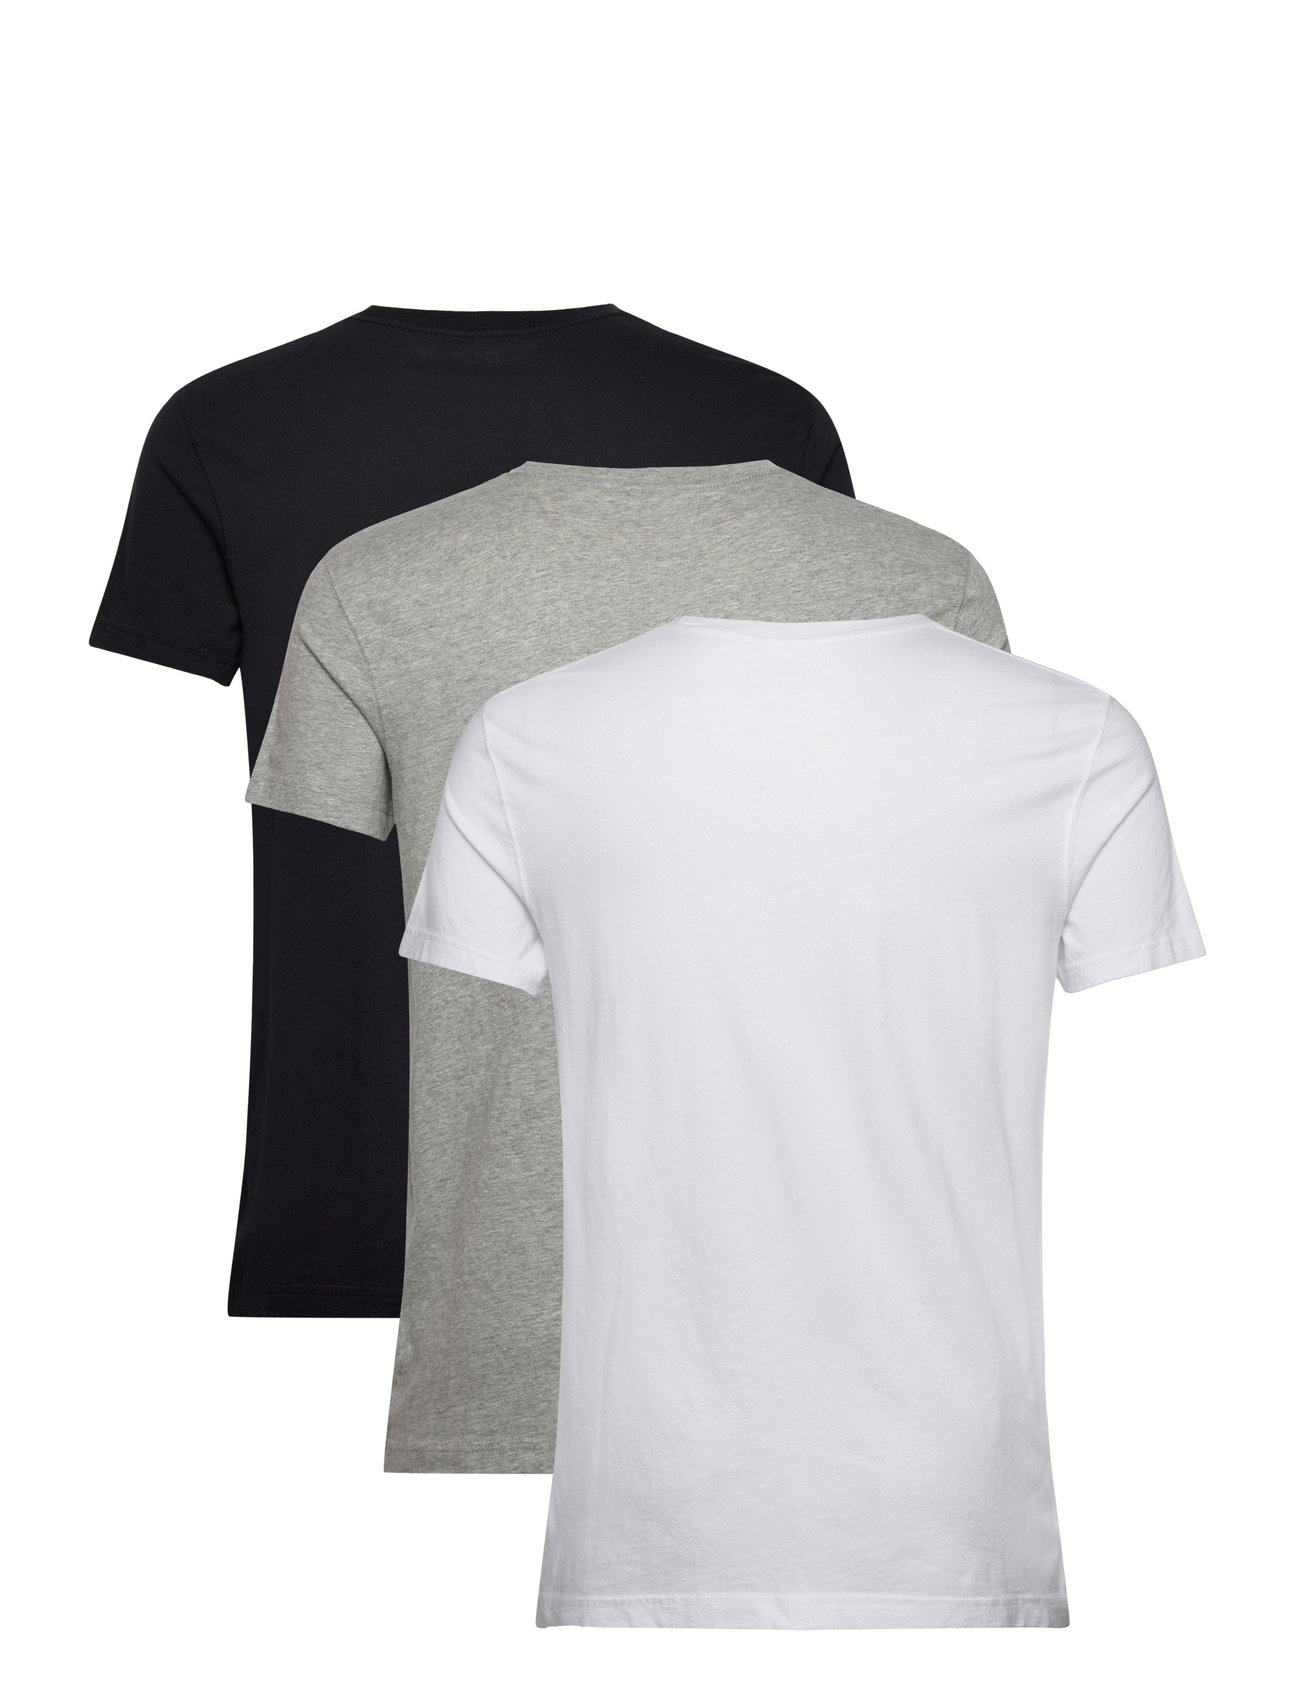 Abercrombie & Fitch - ANF MENS KNITS - t-shirts à manches courtes - white black grey - 1